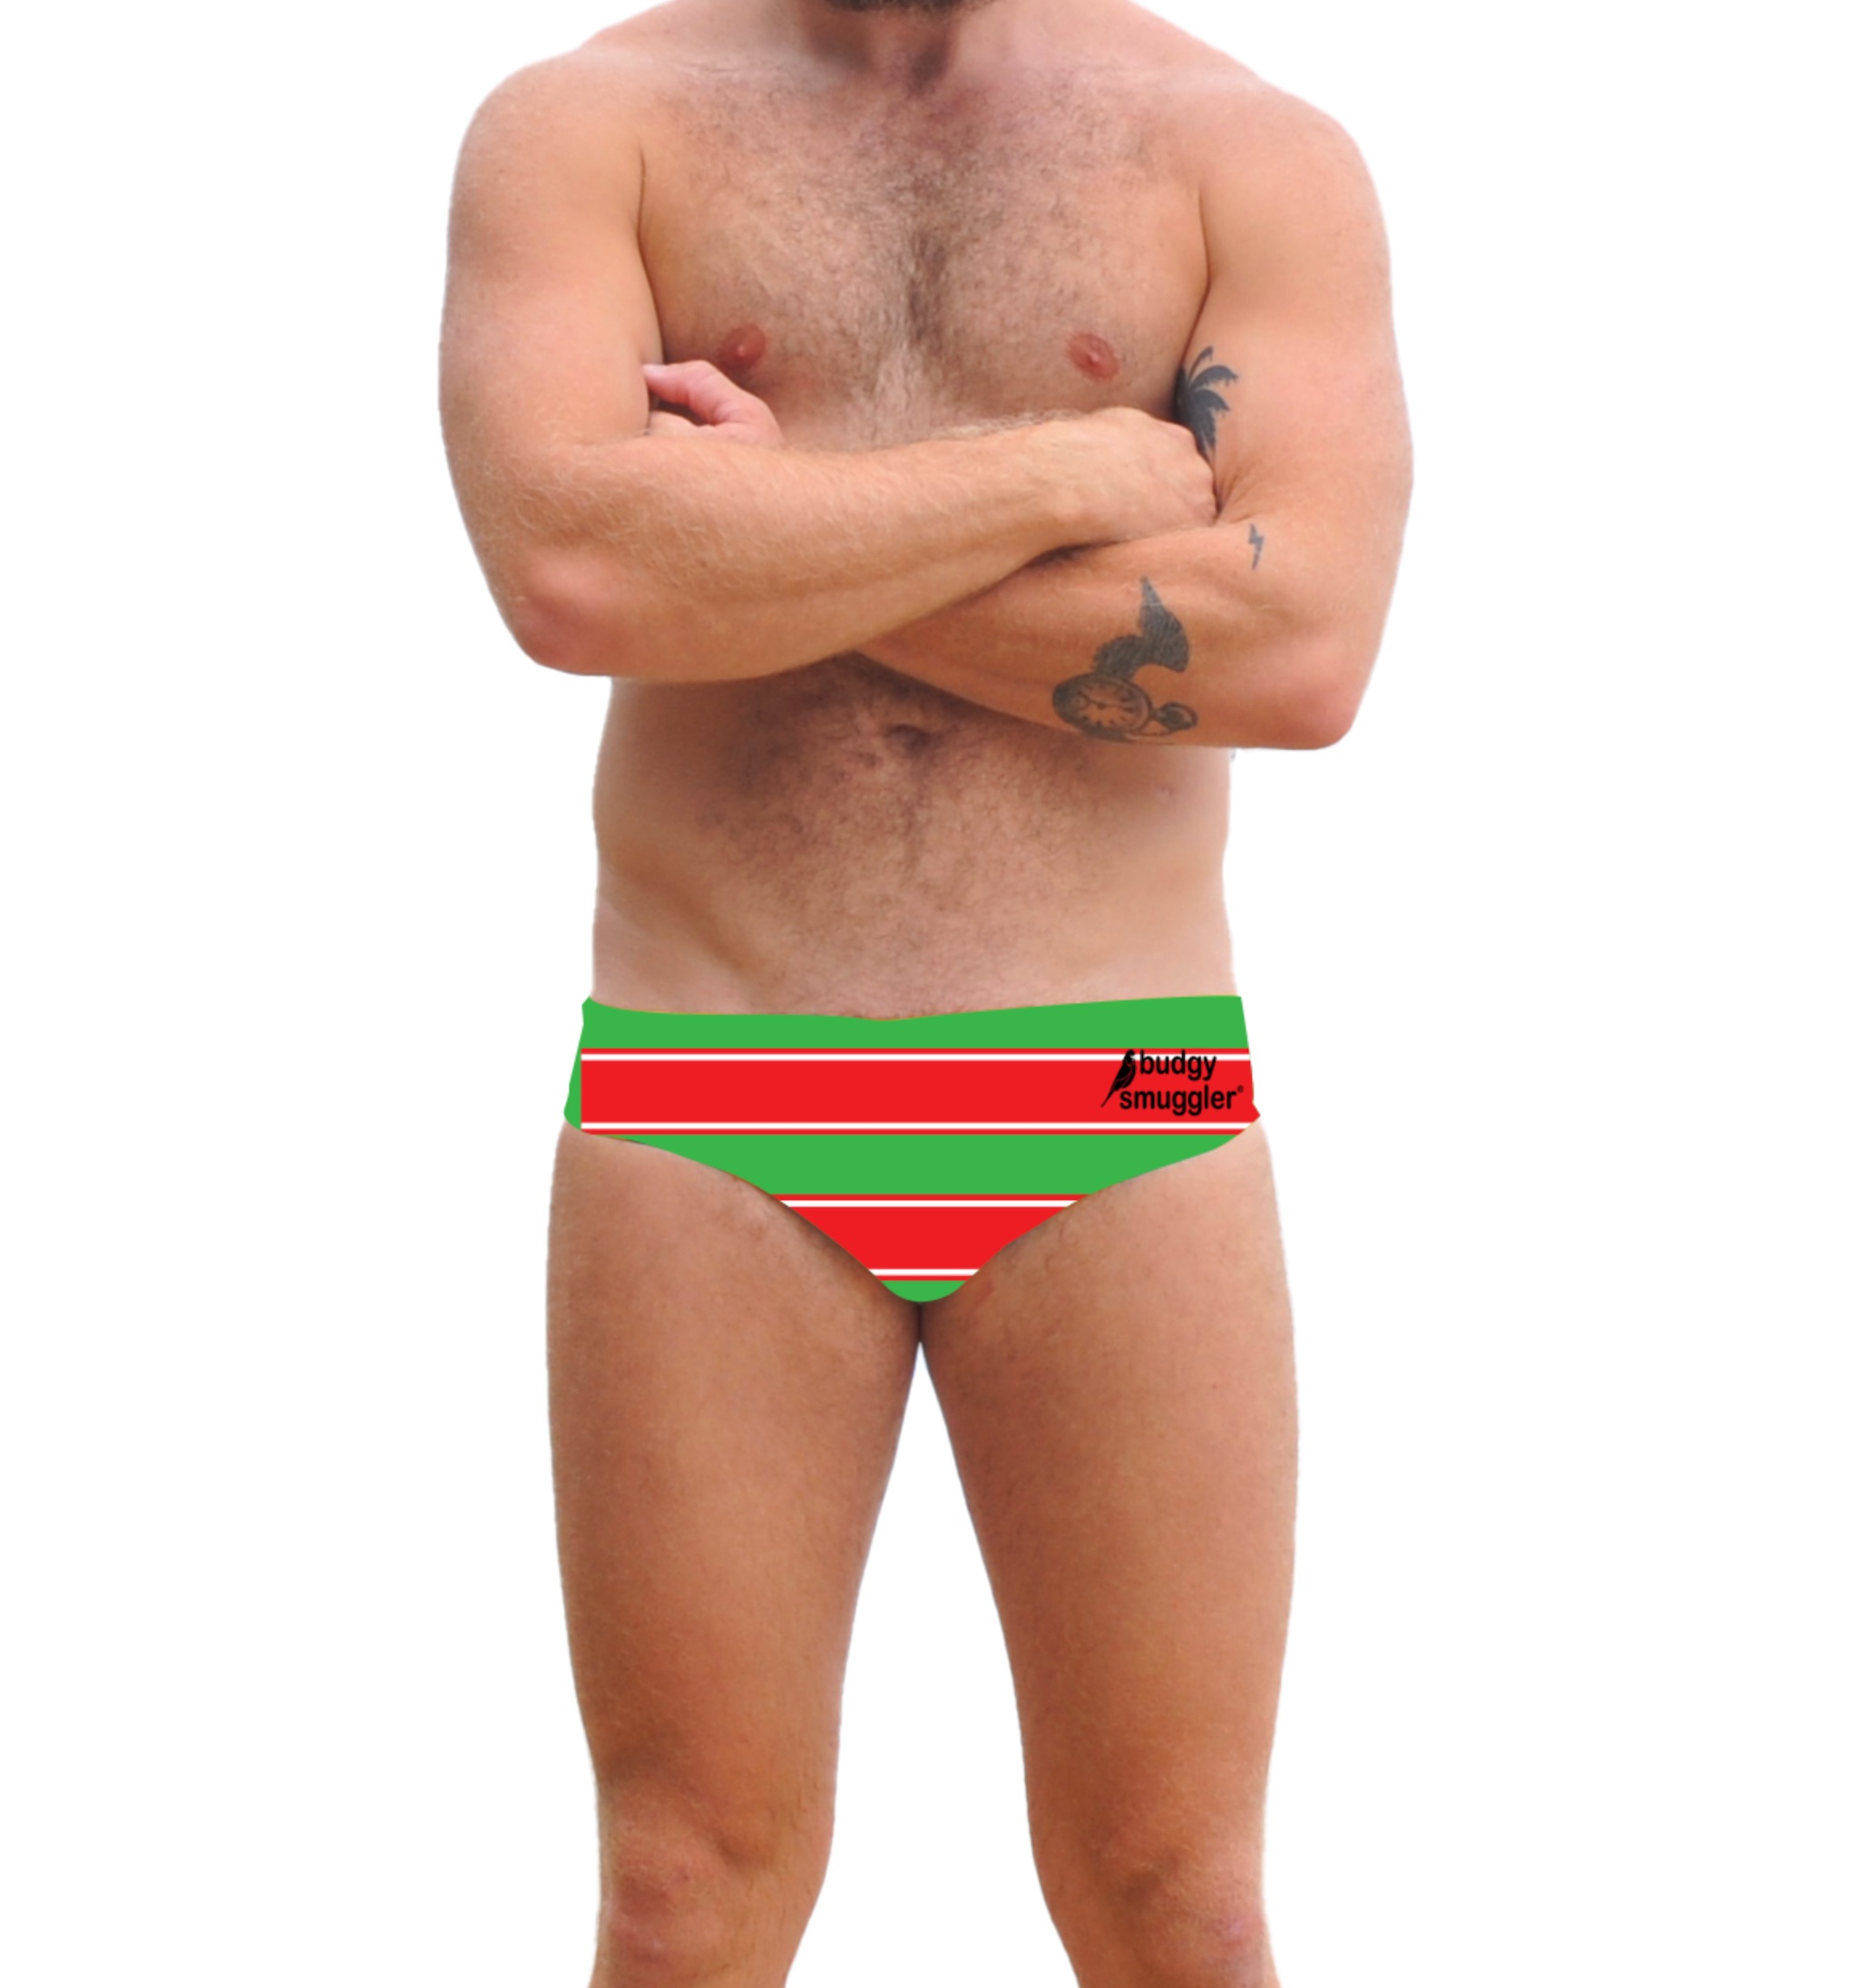 Men's Muddies Budgy Smugglers One Piece - Redlands Rugby Union Club